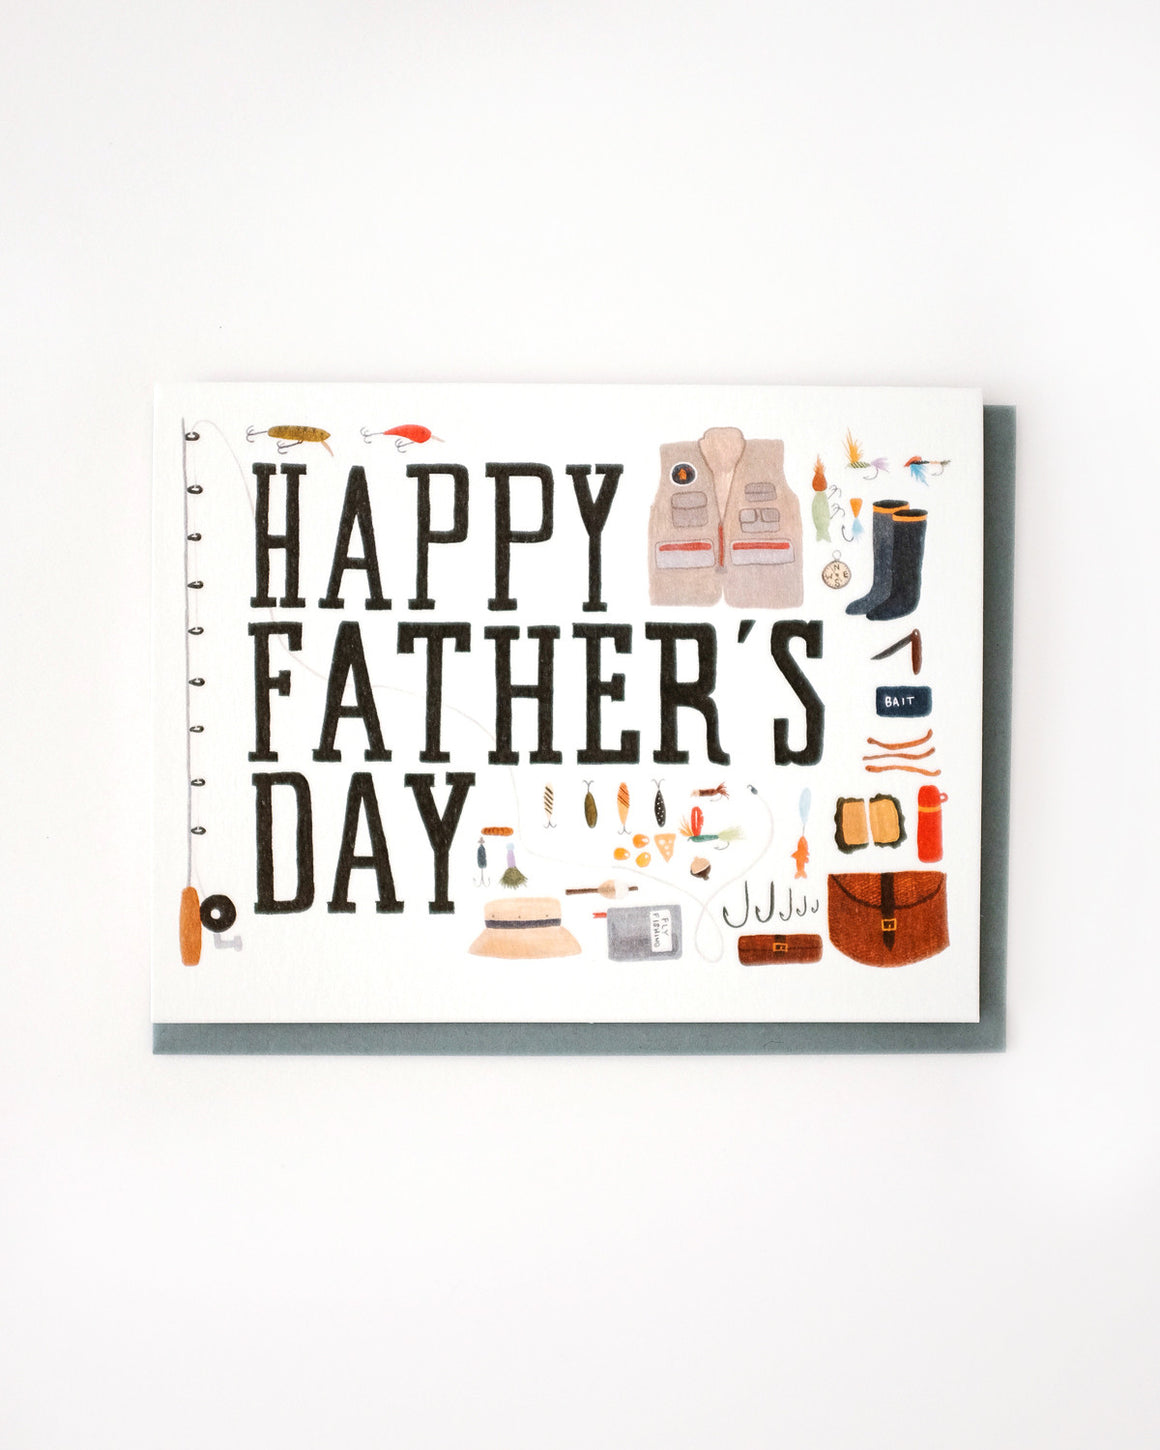 Father's Day Fishing Card